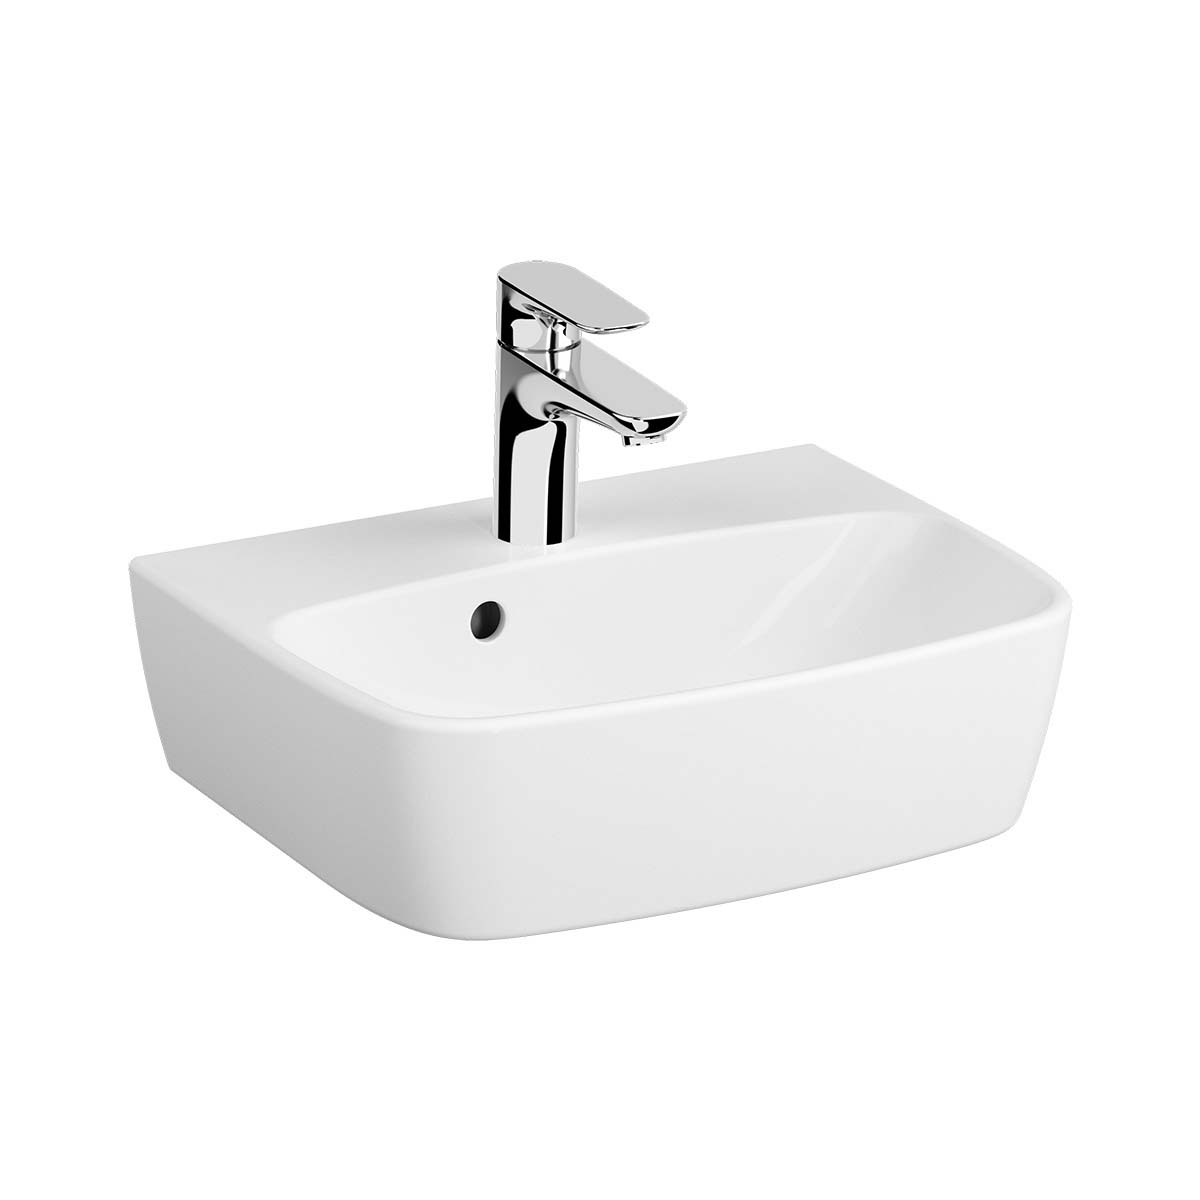 Compact Basin, 45 cm, One Tap Hole, With Overflow Hole